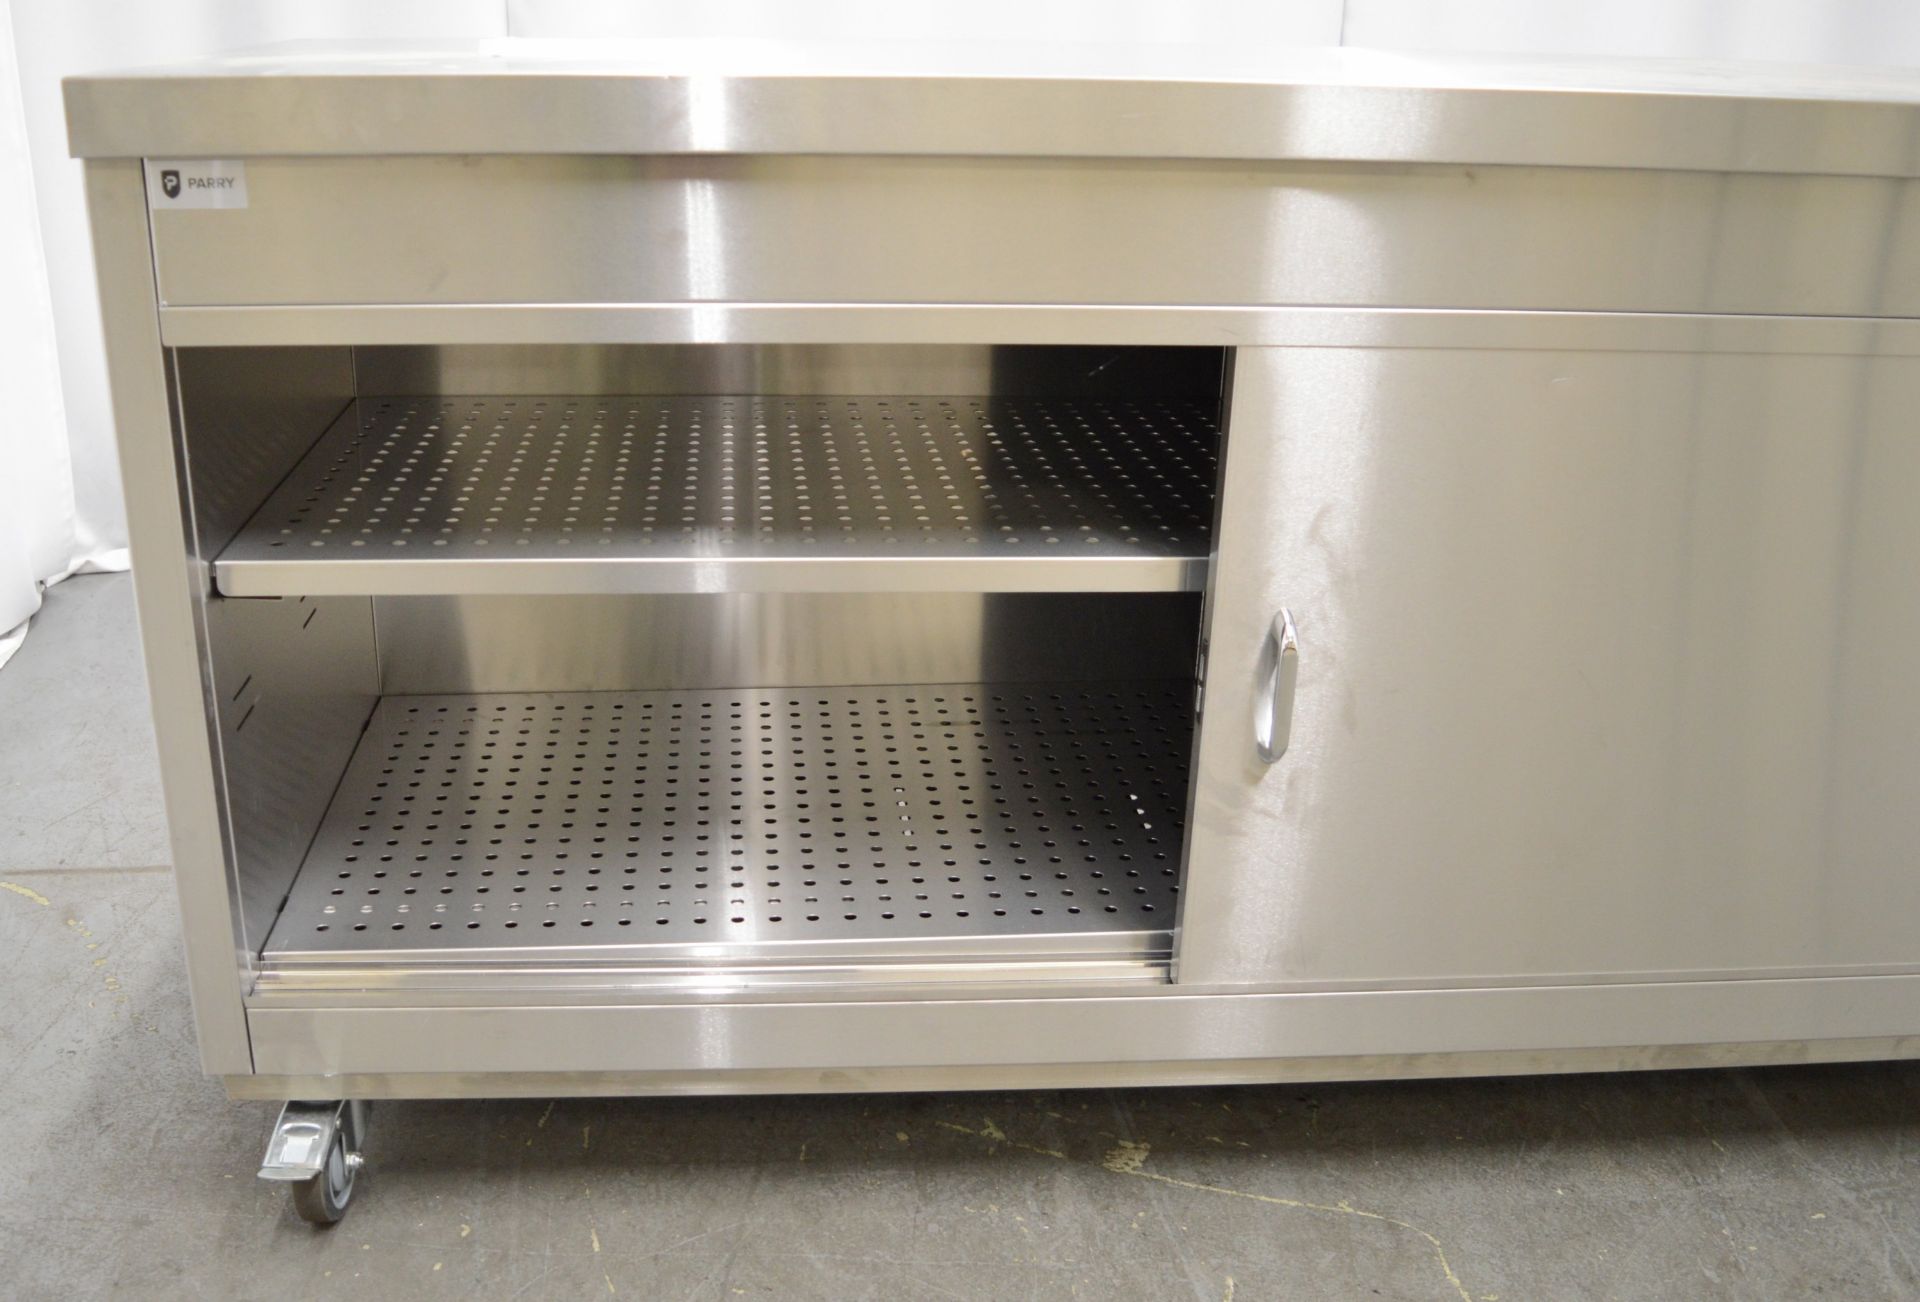 Parry HOT18 stainless steel hot cupboard, 1800x650x900mm (LxDxH) 230v - Image 2 of 6